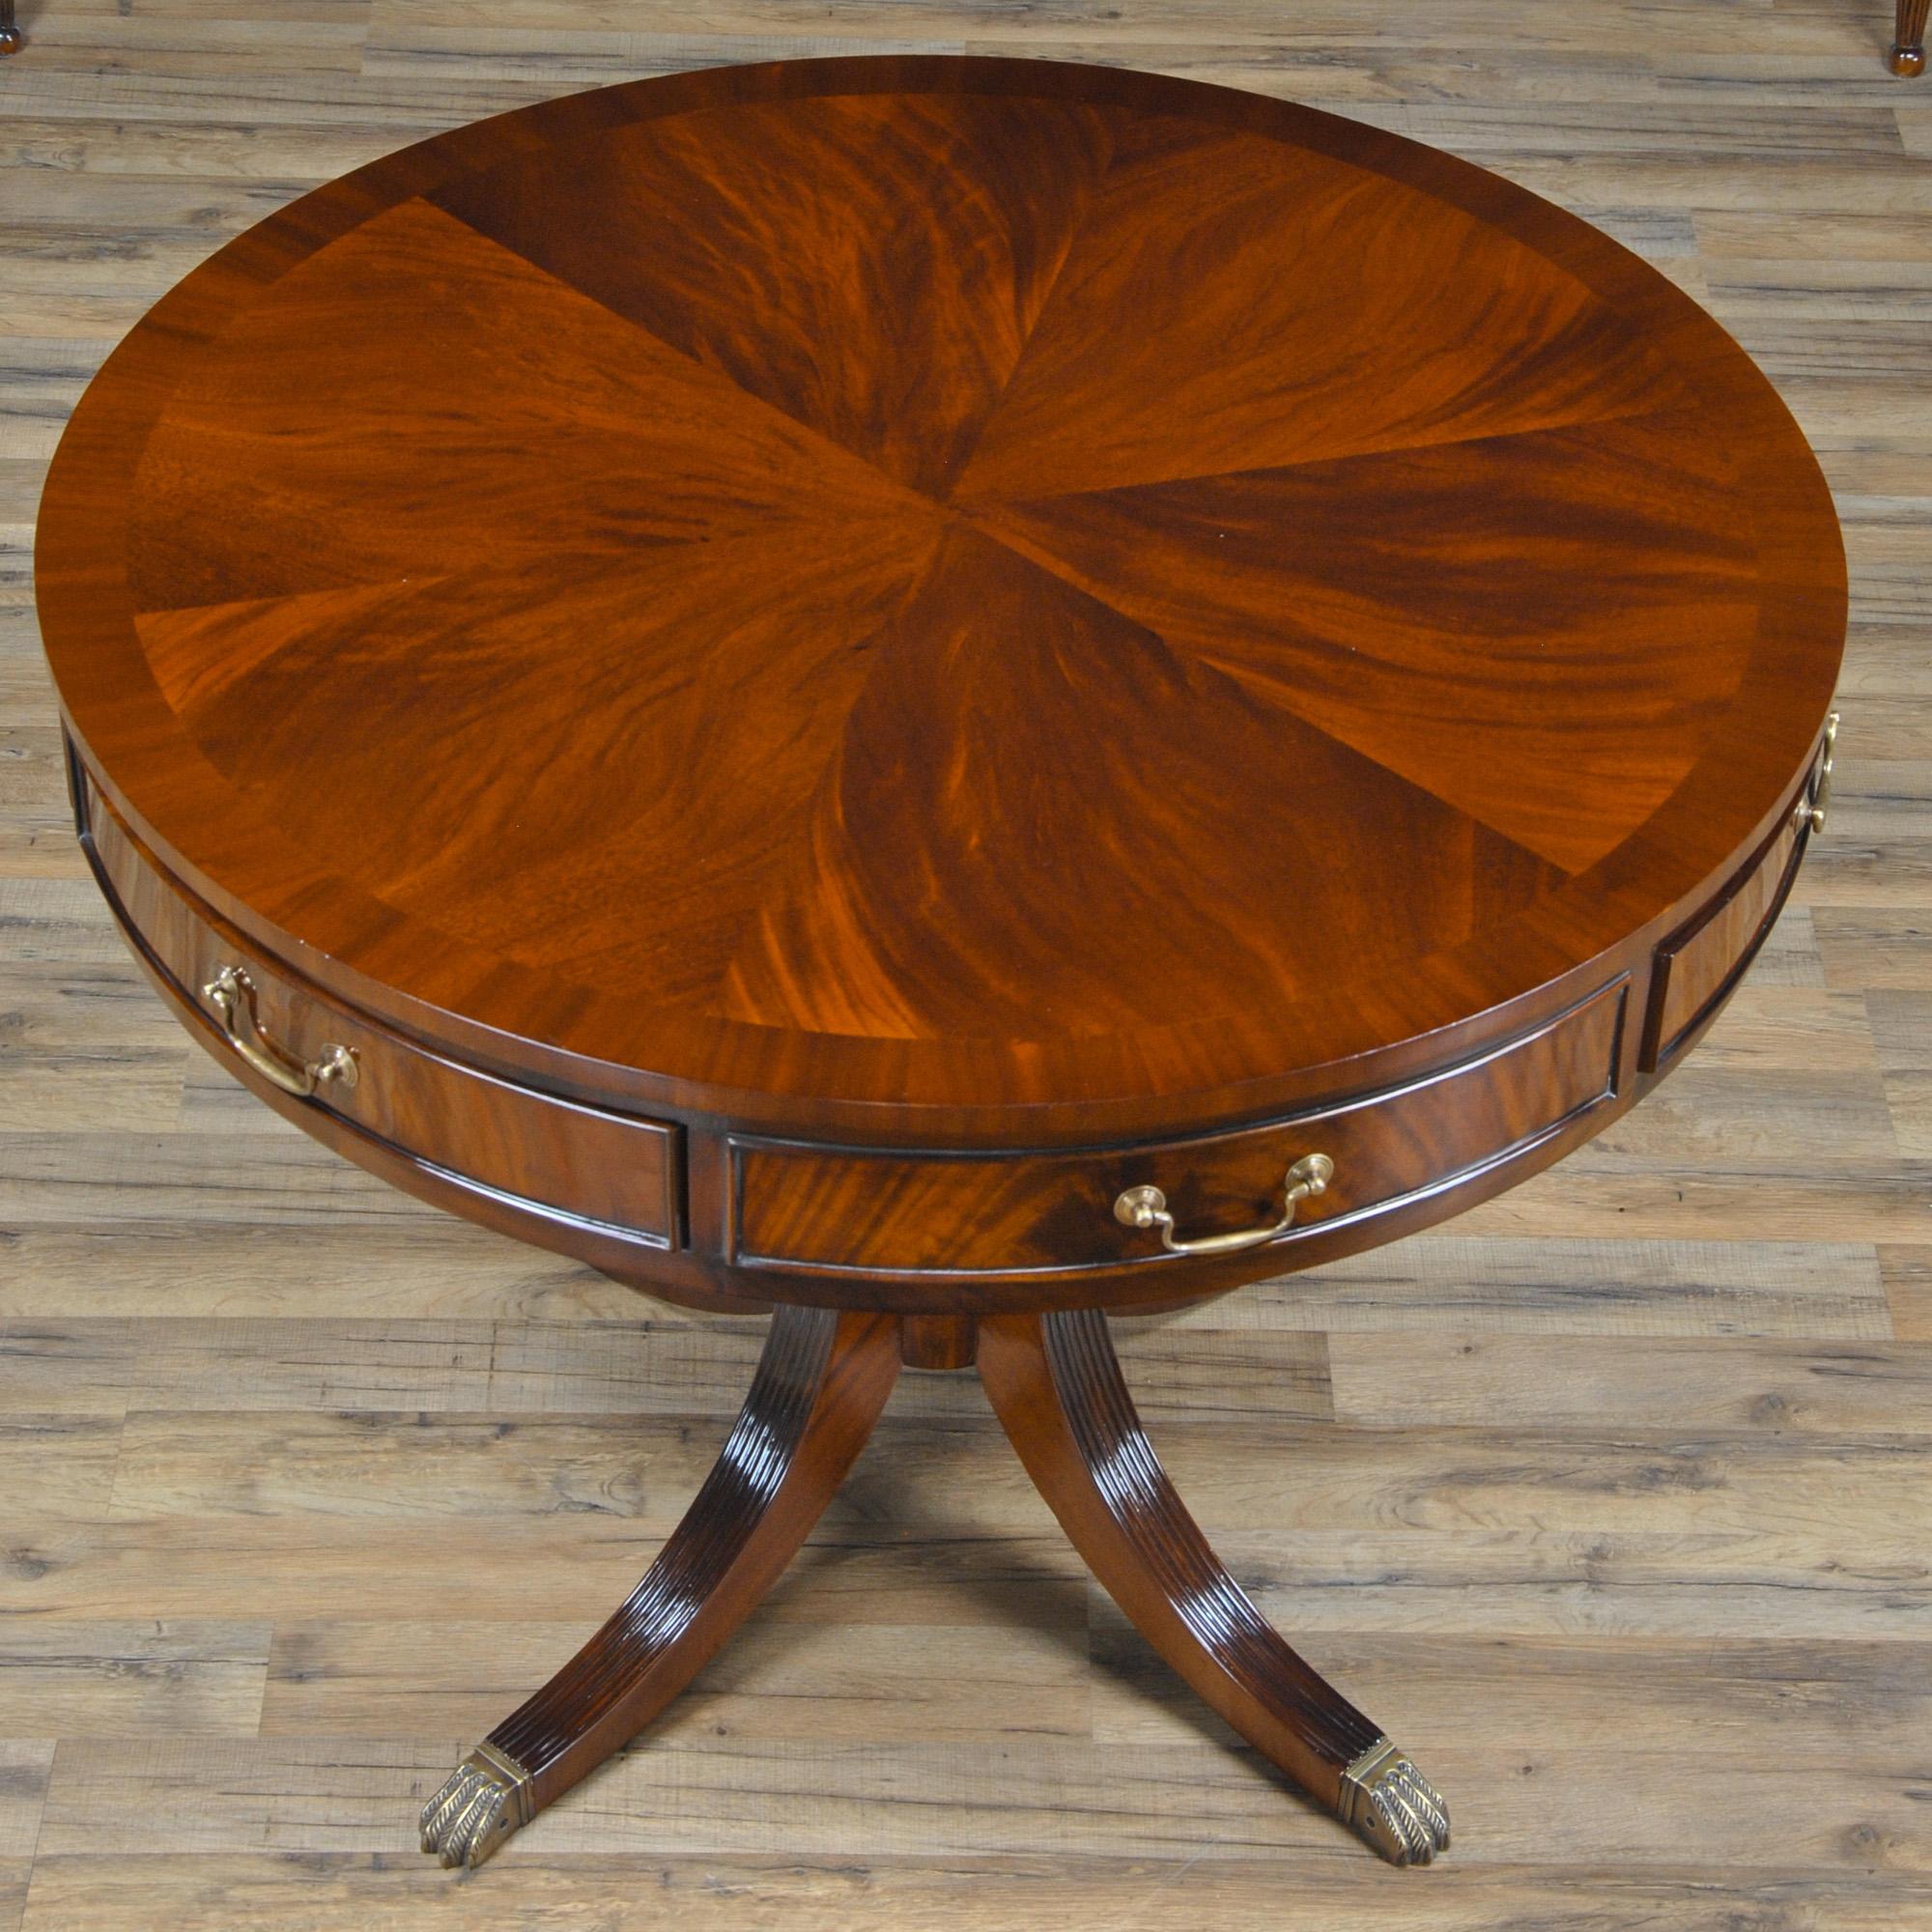 This Large Drum Table from Niagara Furniture was inspired by large rent tables used in England in the 18th Century to help organize large estates. This form of Large Drum Table has translated well into modern living. Primarily used in large entry